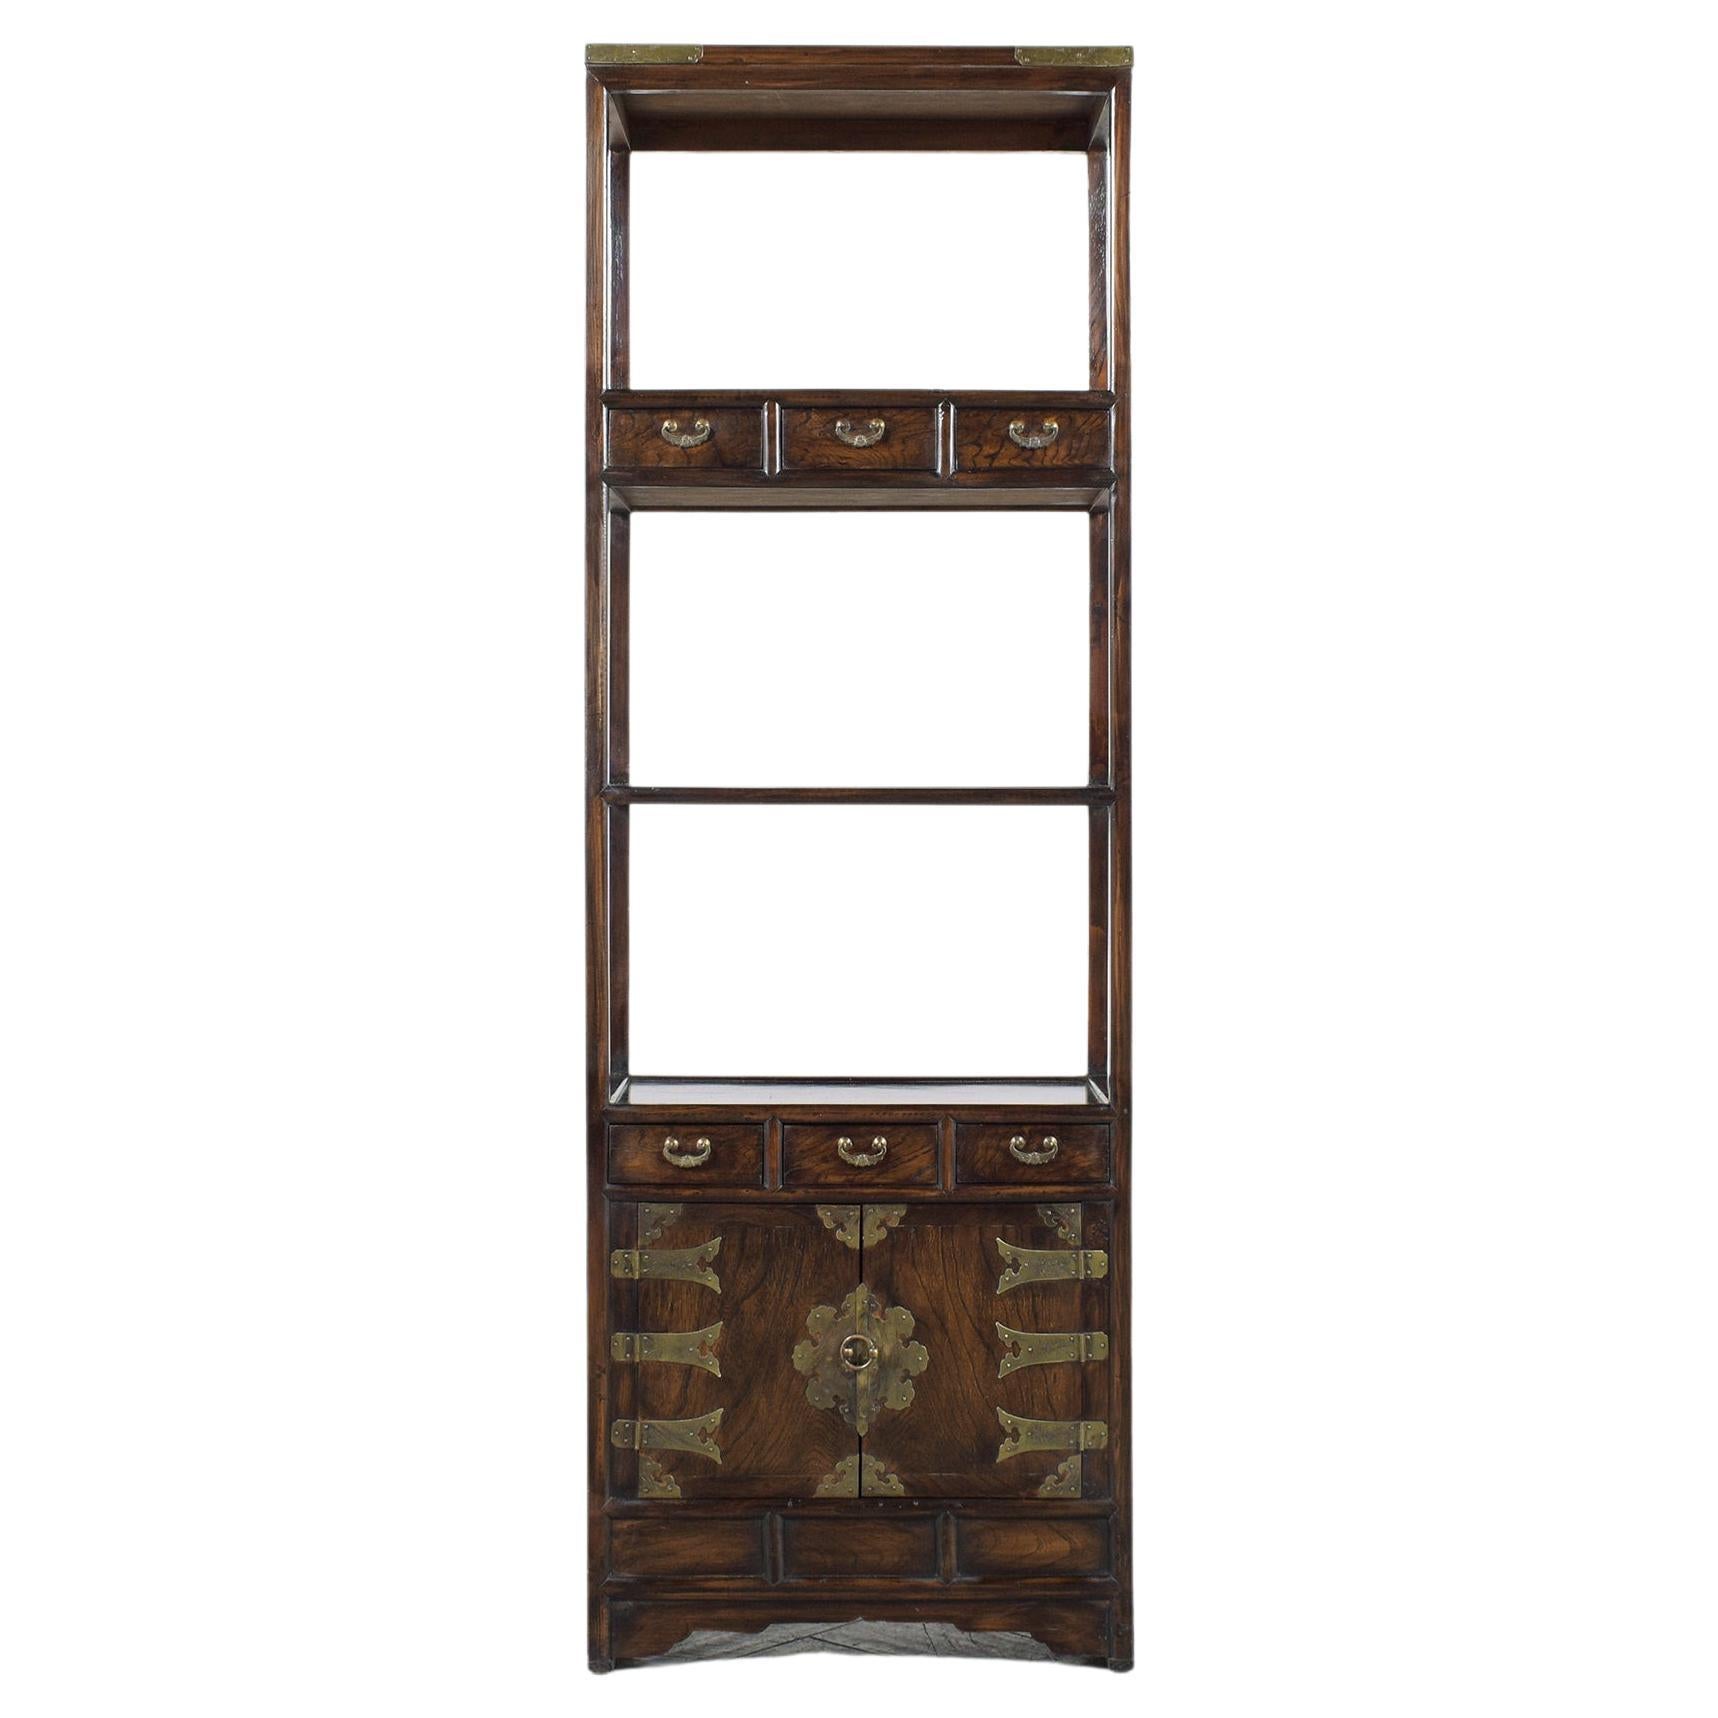 Vintage Chinese Elm Wood Bookcase: A Statement of Timeless Craftsmanship